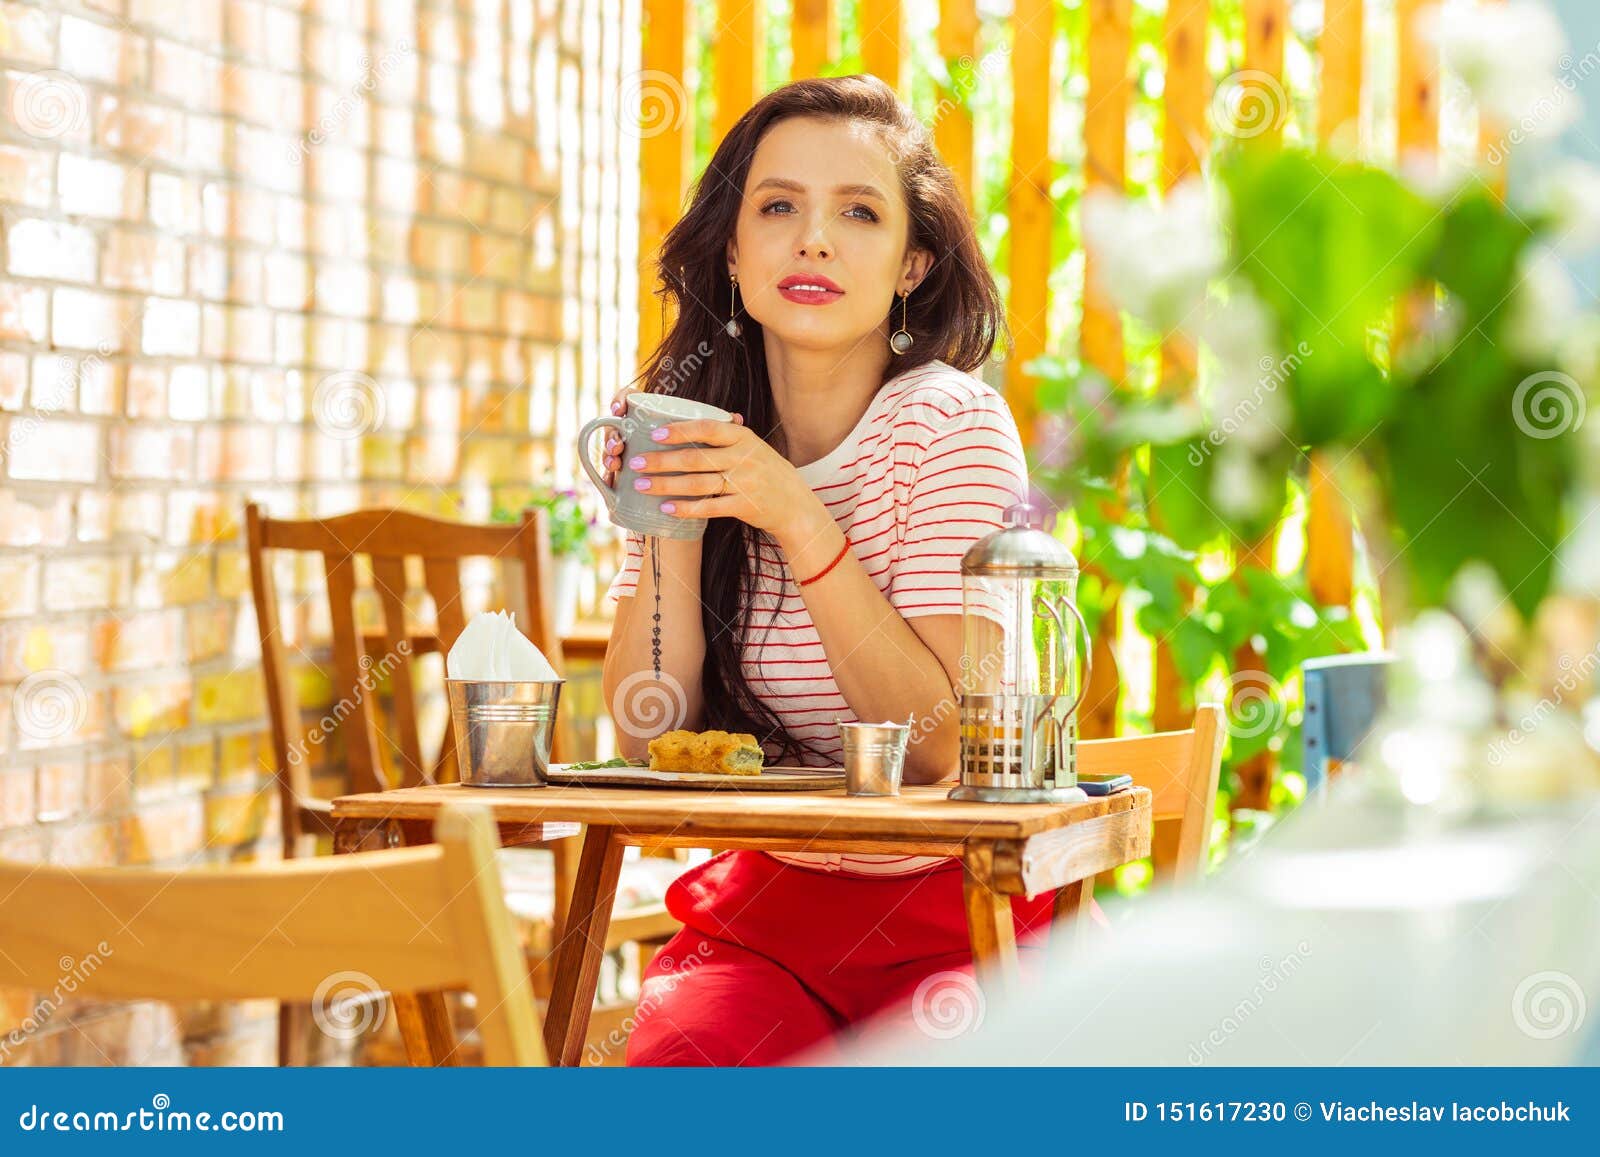 Thoughtful Woman Spending Her Morning In A Cafe. Stock Photo - Image of ...
